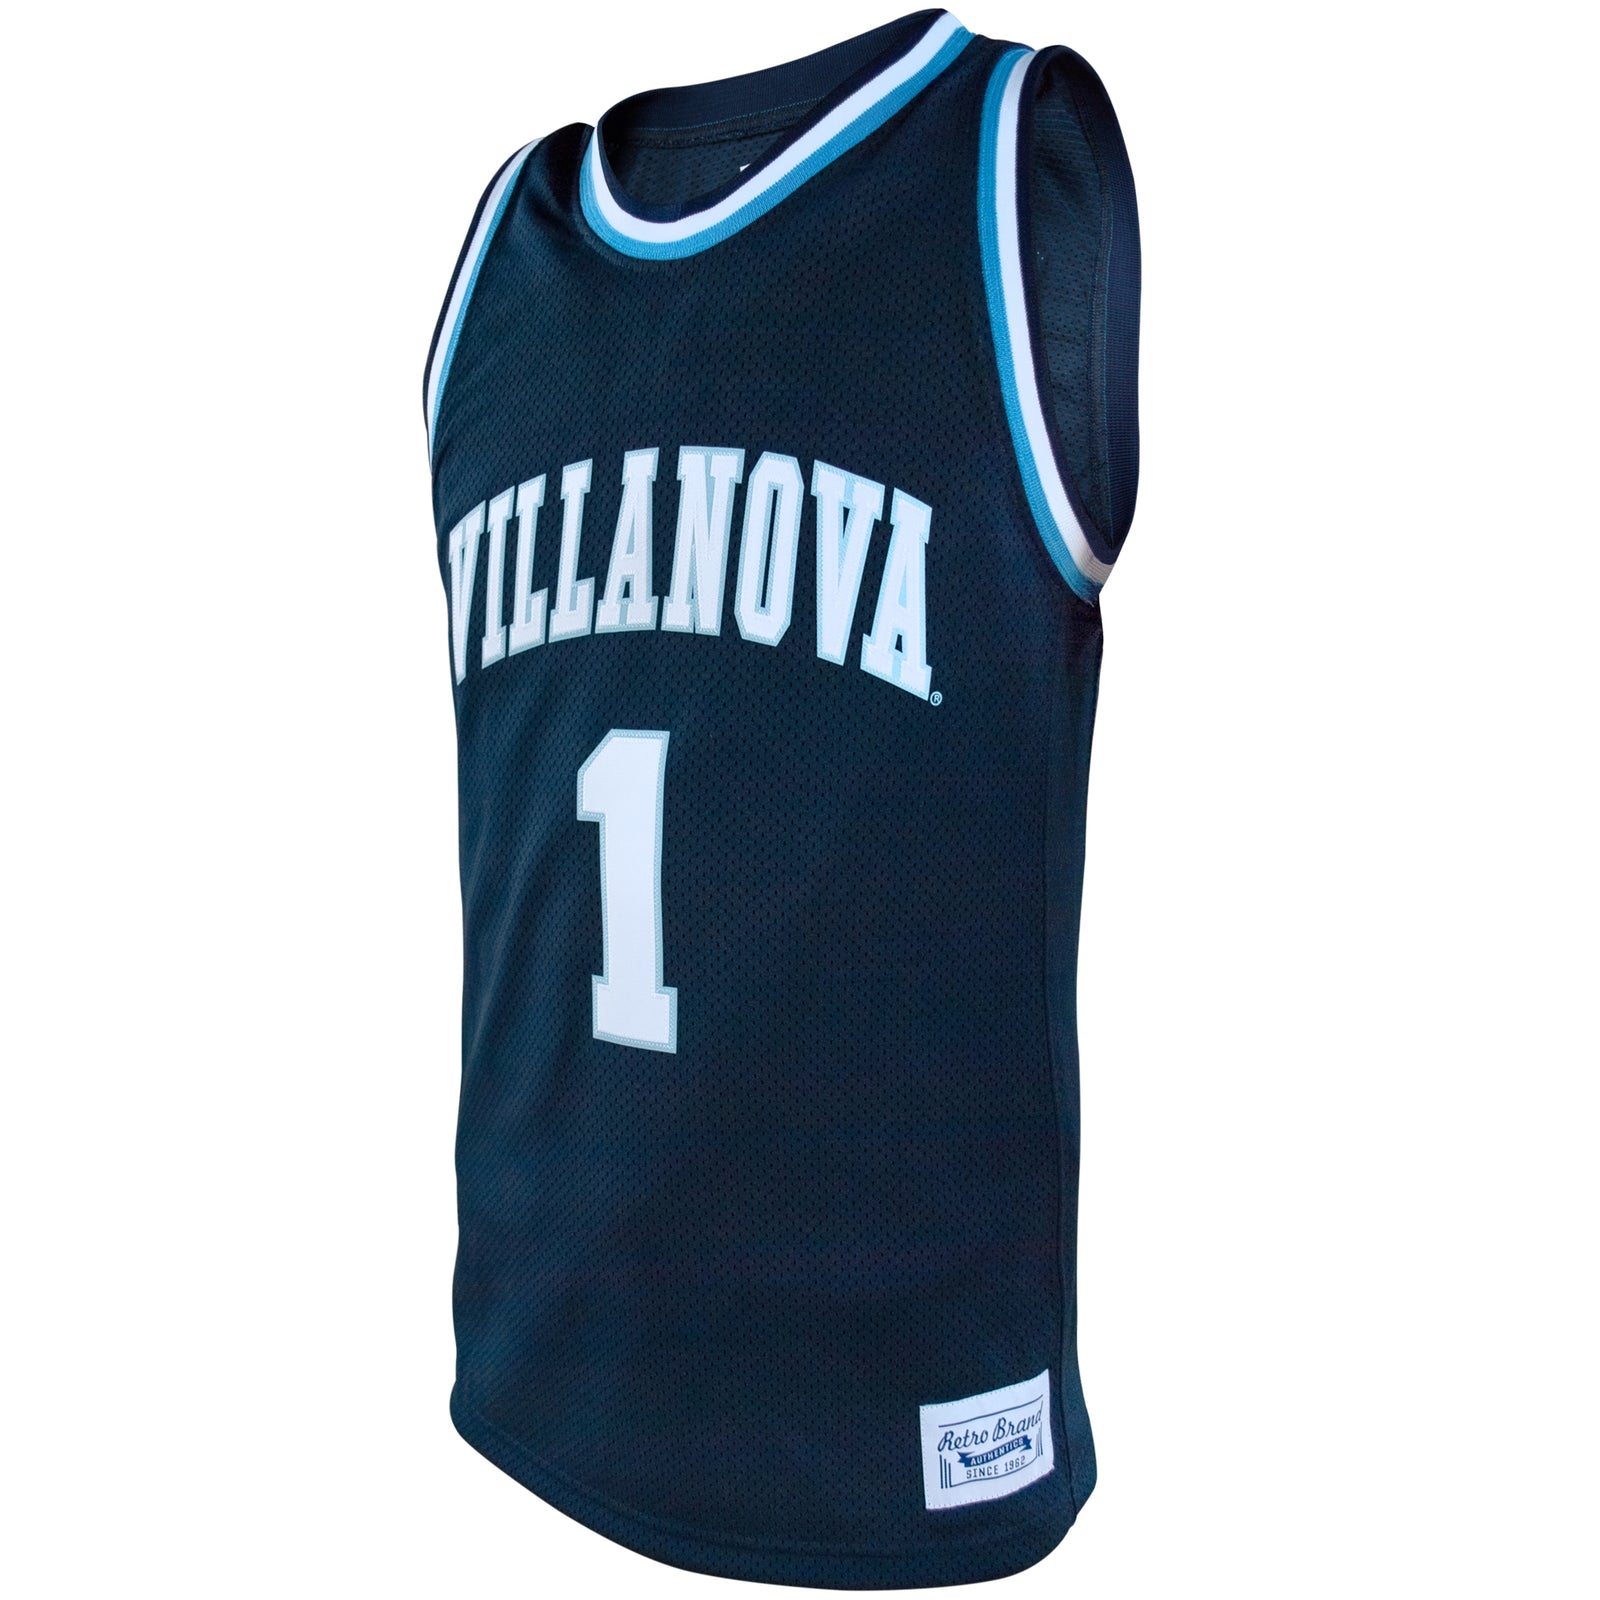 giannis jersey front